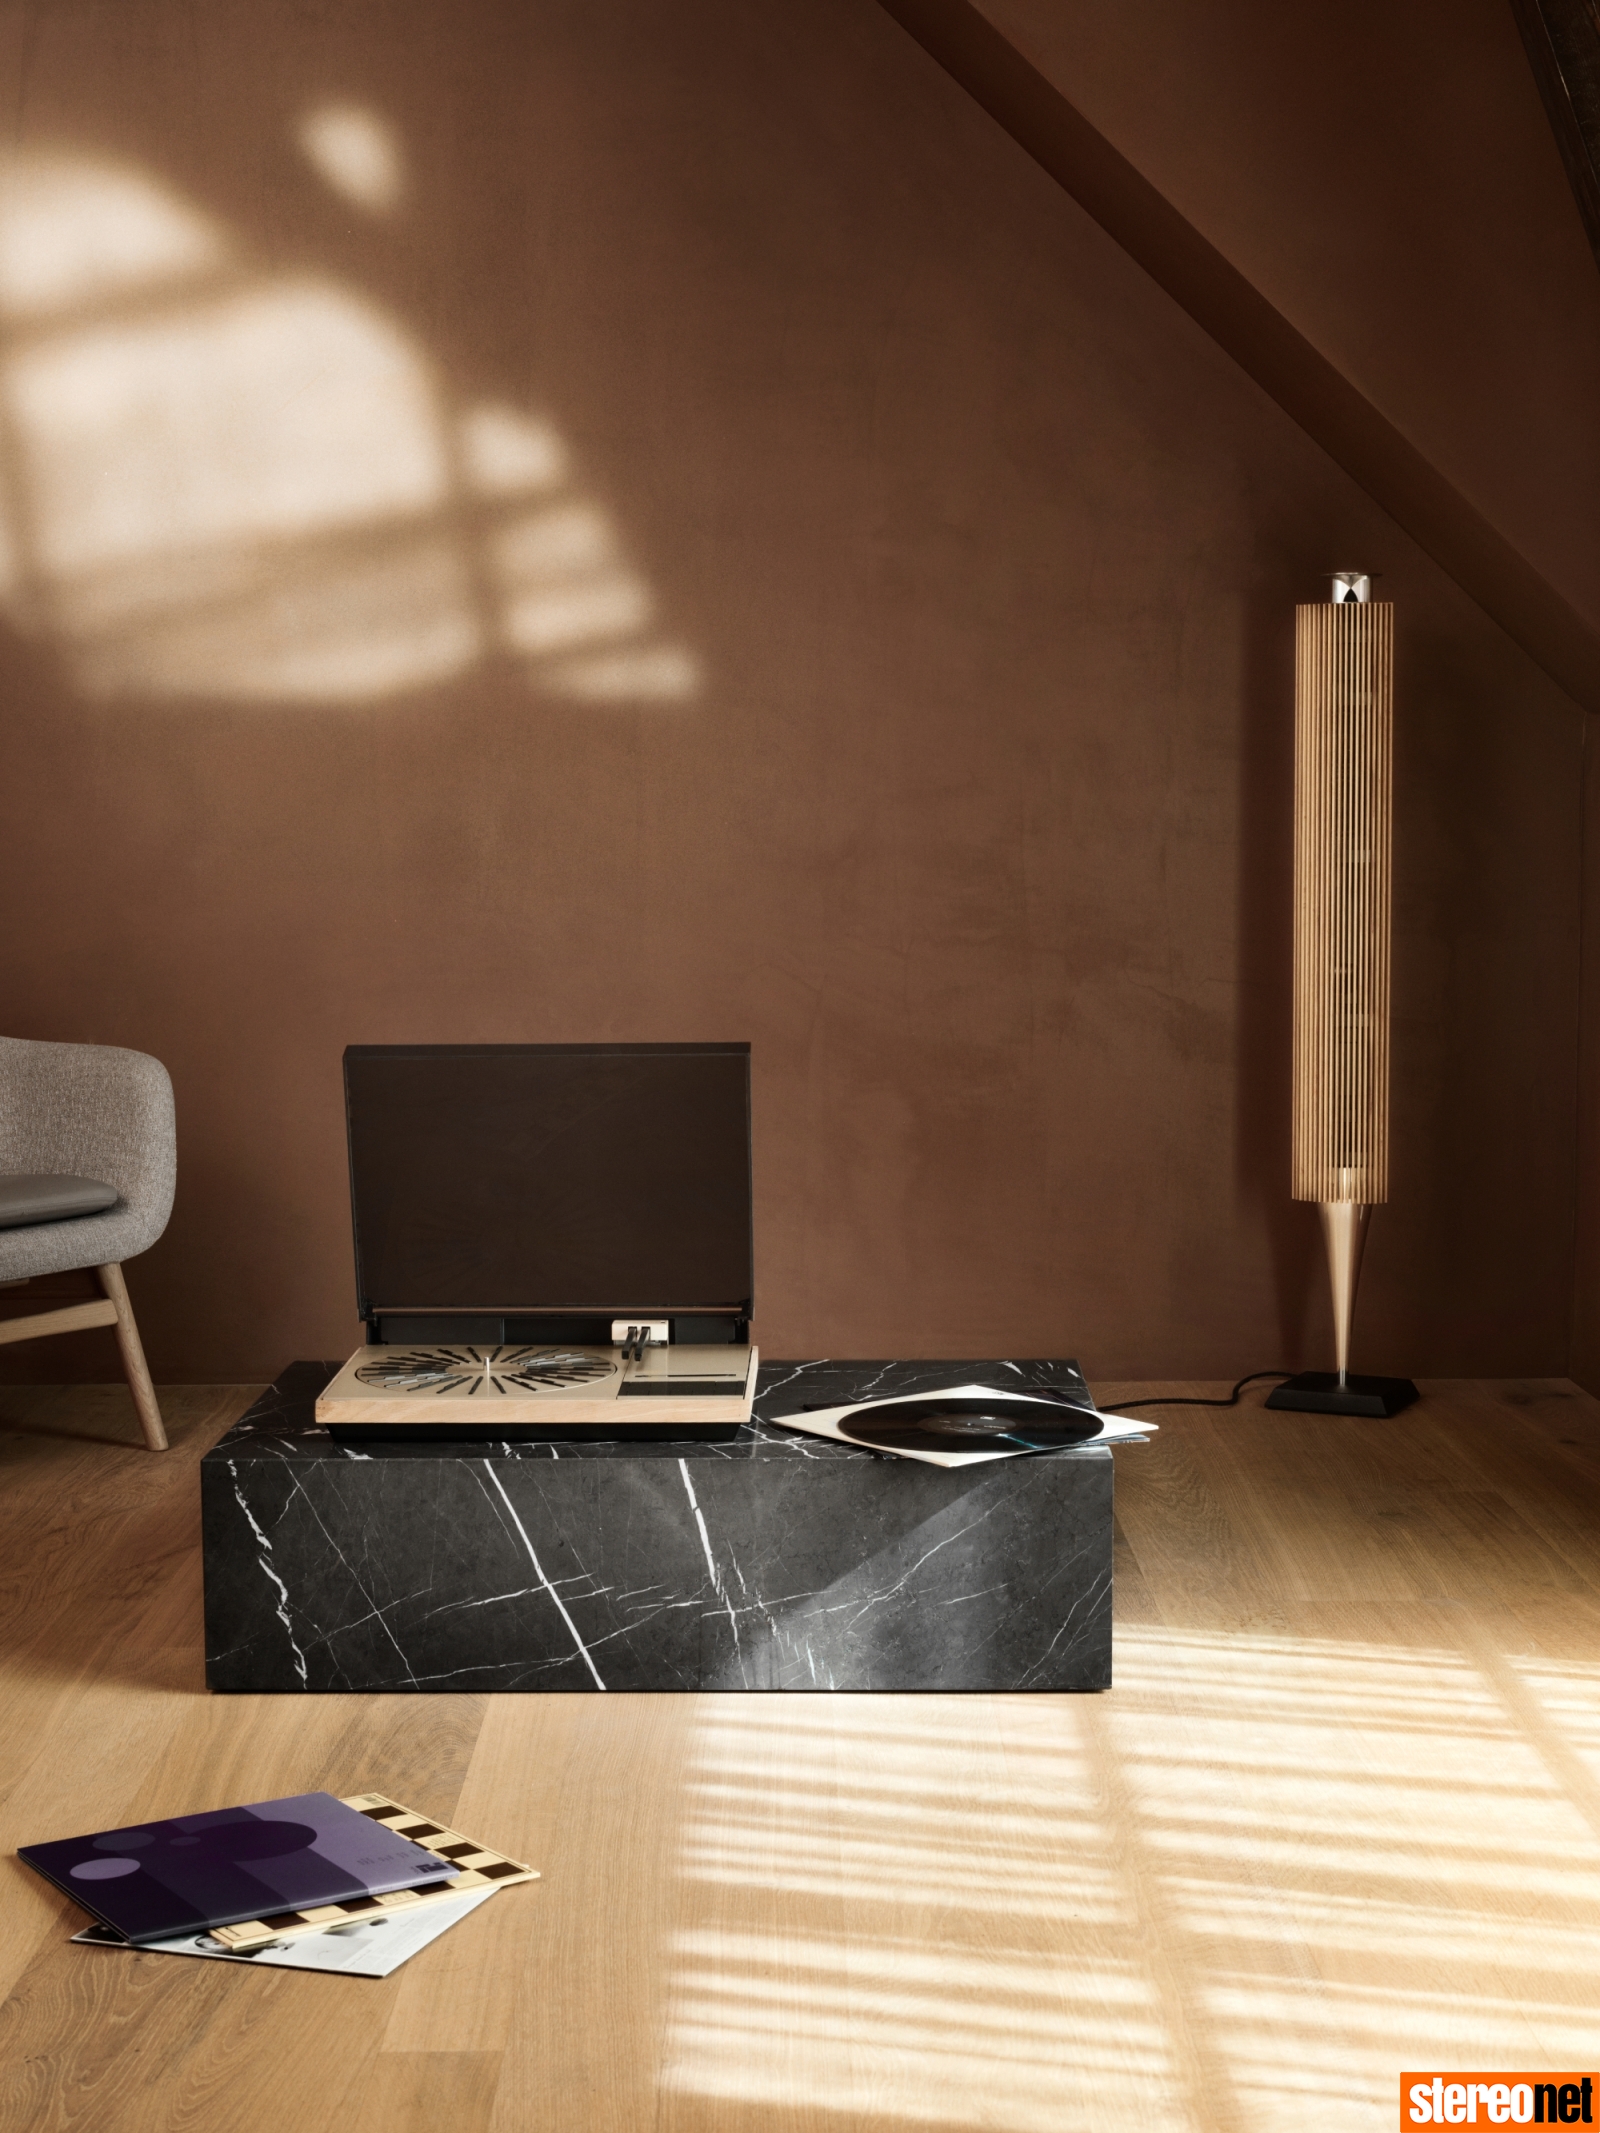 Bang & Olufsen 4000c Recreated Limited Edition turntable